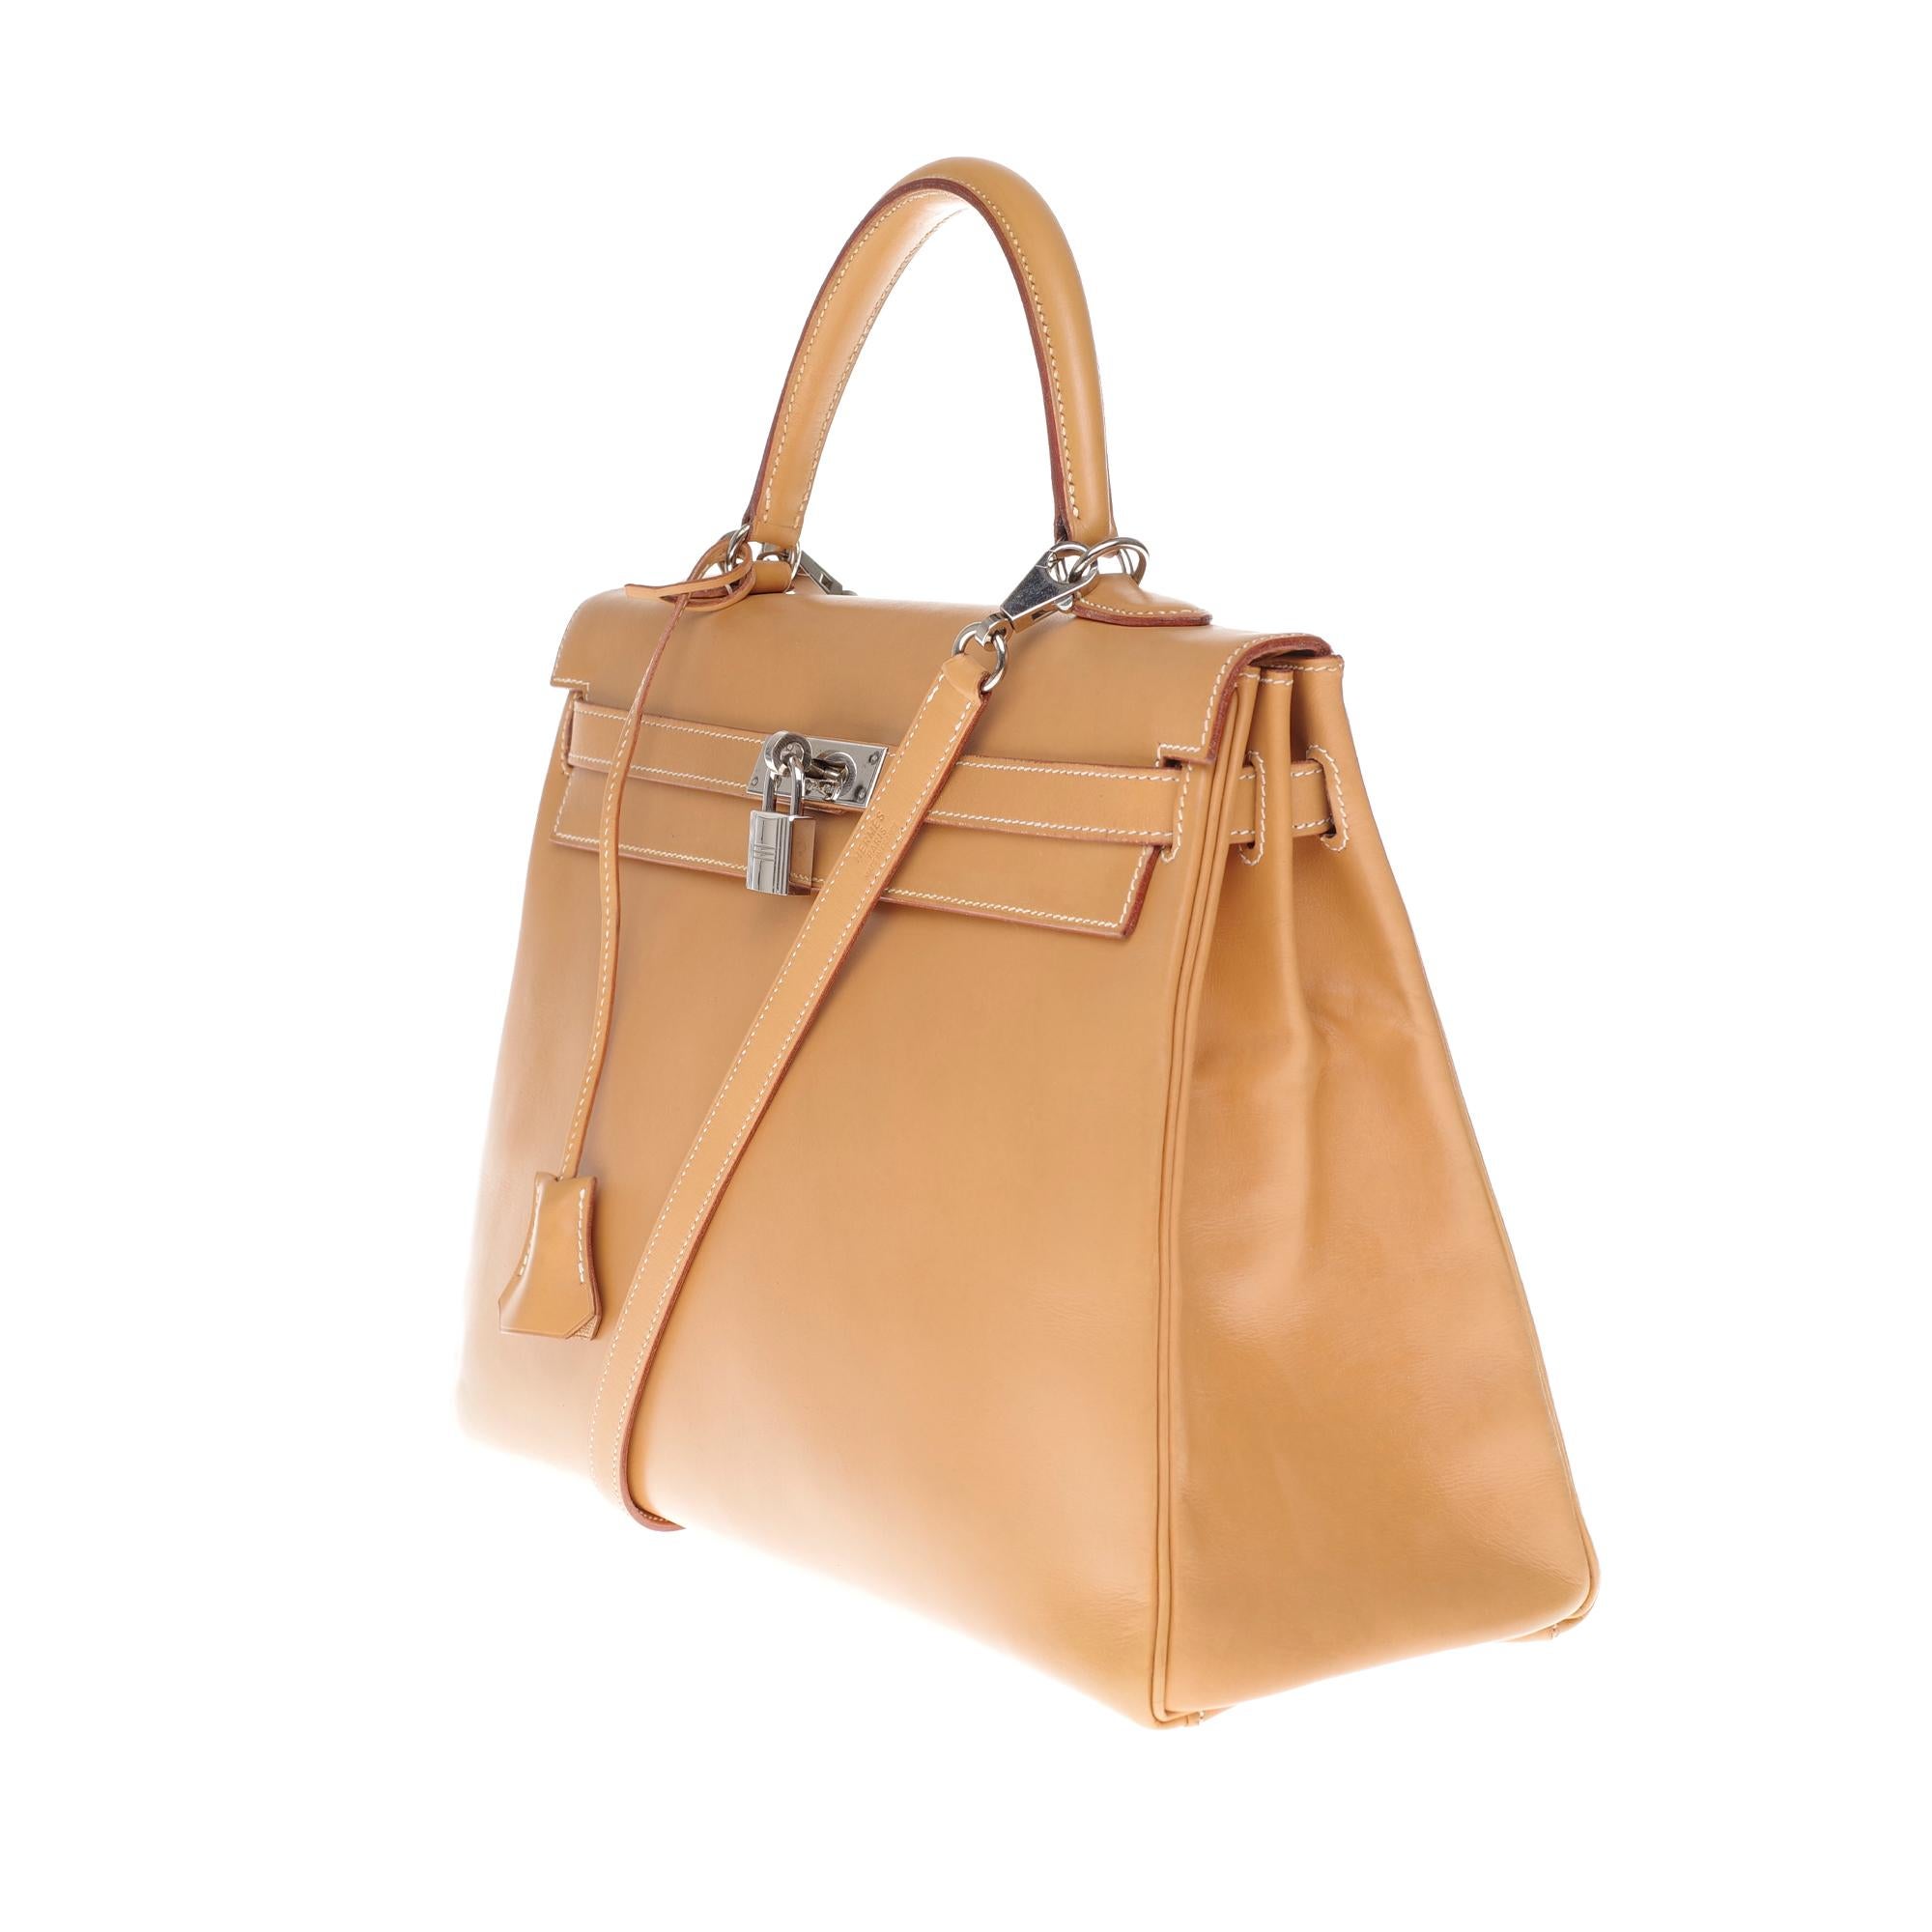 Orange Hermès Kelly 35 handbag in natural calf leather with strap and silver hardware